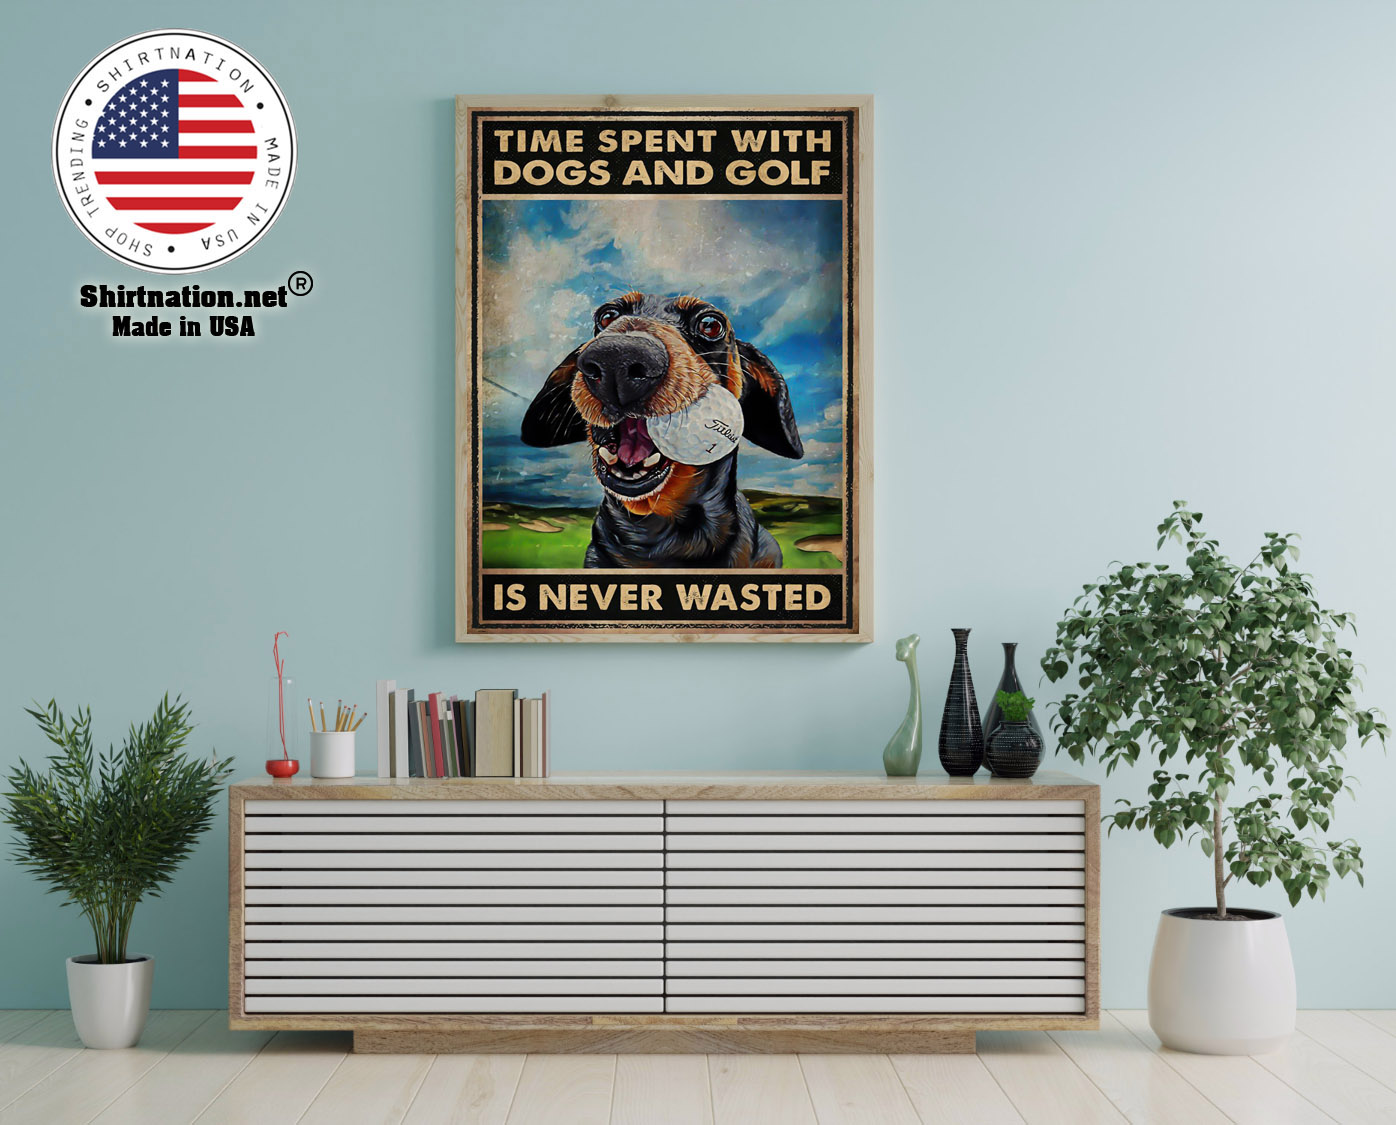 Time spent with dogs and golf is never wasted poster 12